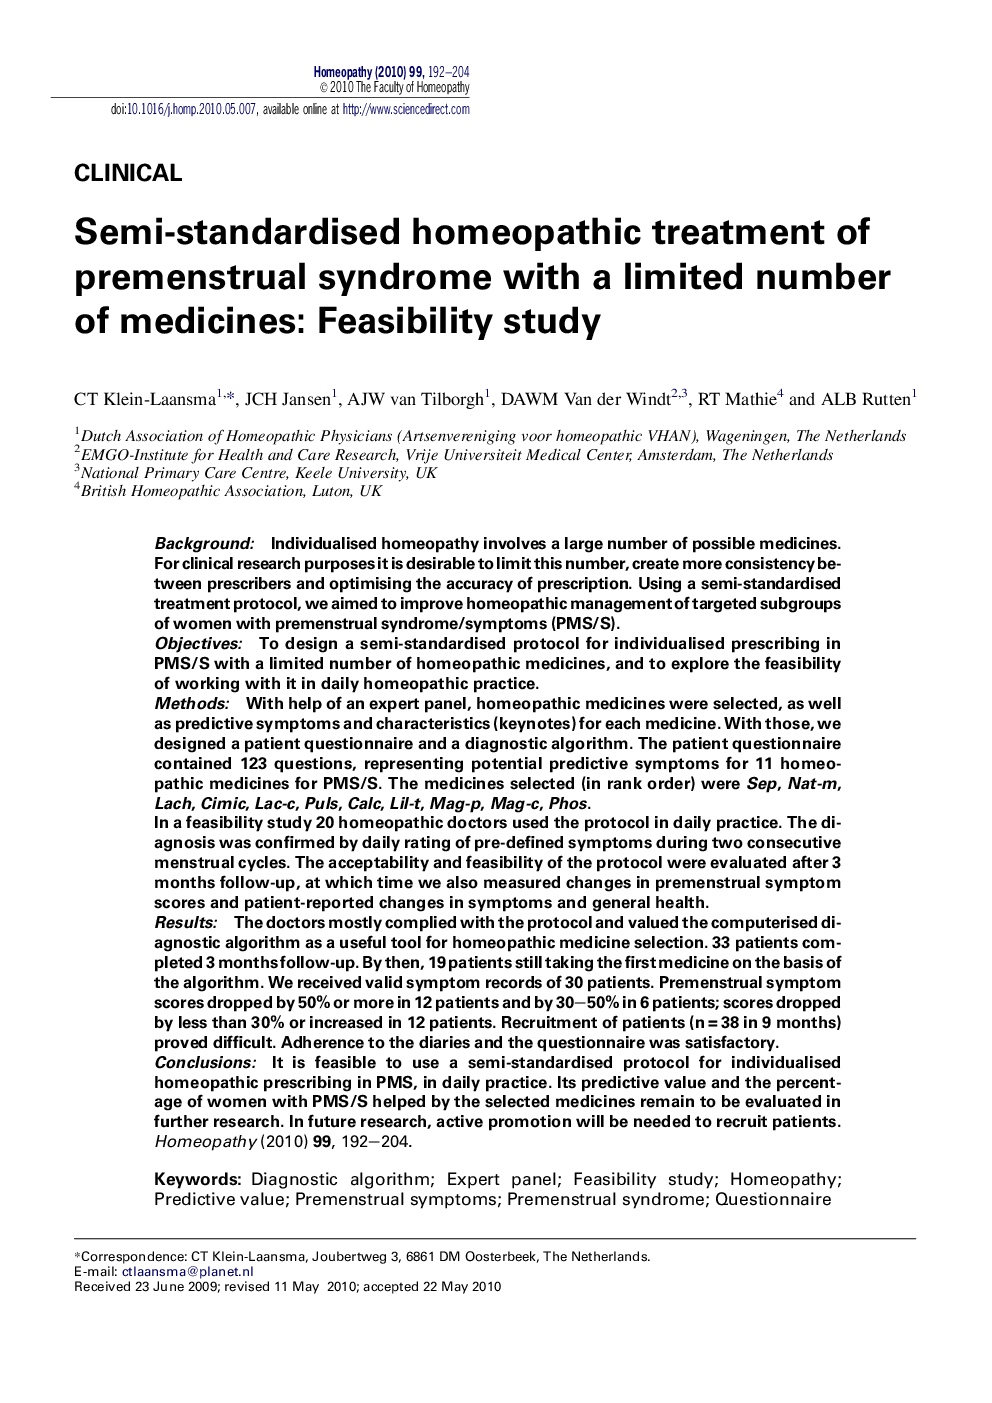 Semi-standardised homeopathic treatment of premenstrual syndrome with a limited number of medicines: Feasibility study